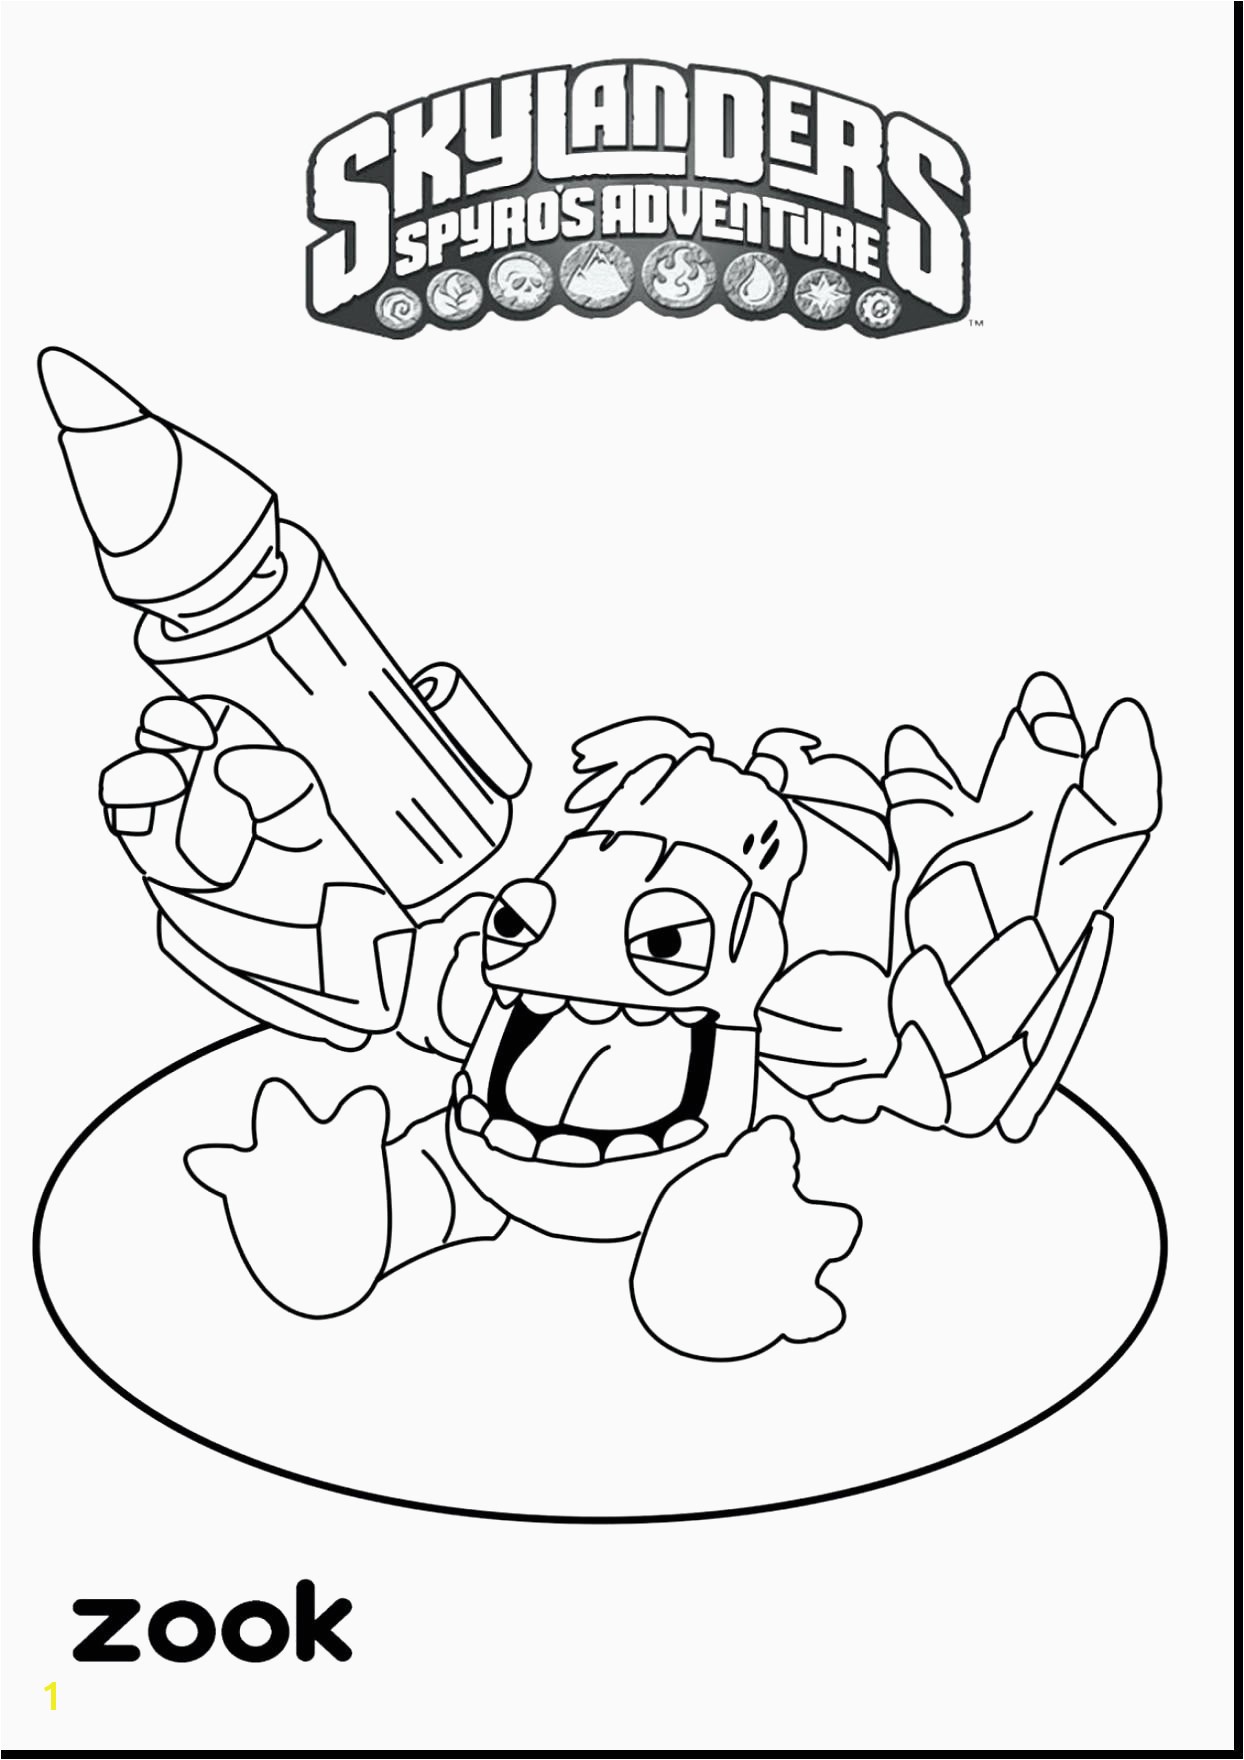 Cool Coloring Pages For Older Kids Christmas Socks Coloring Pages